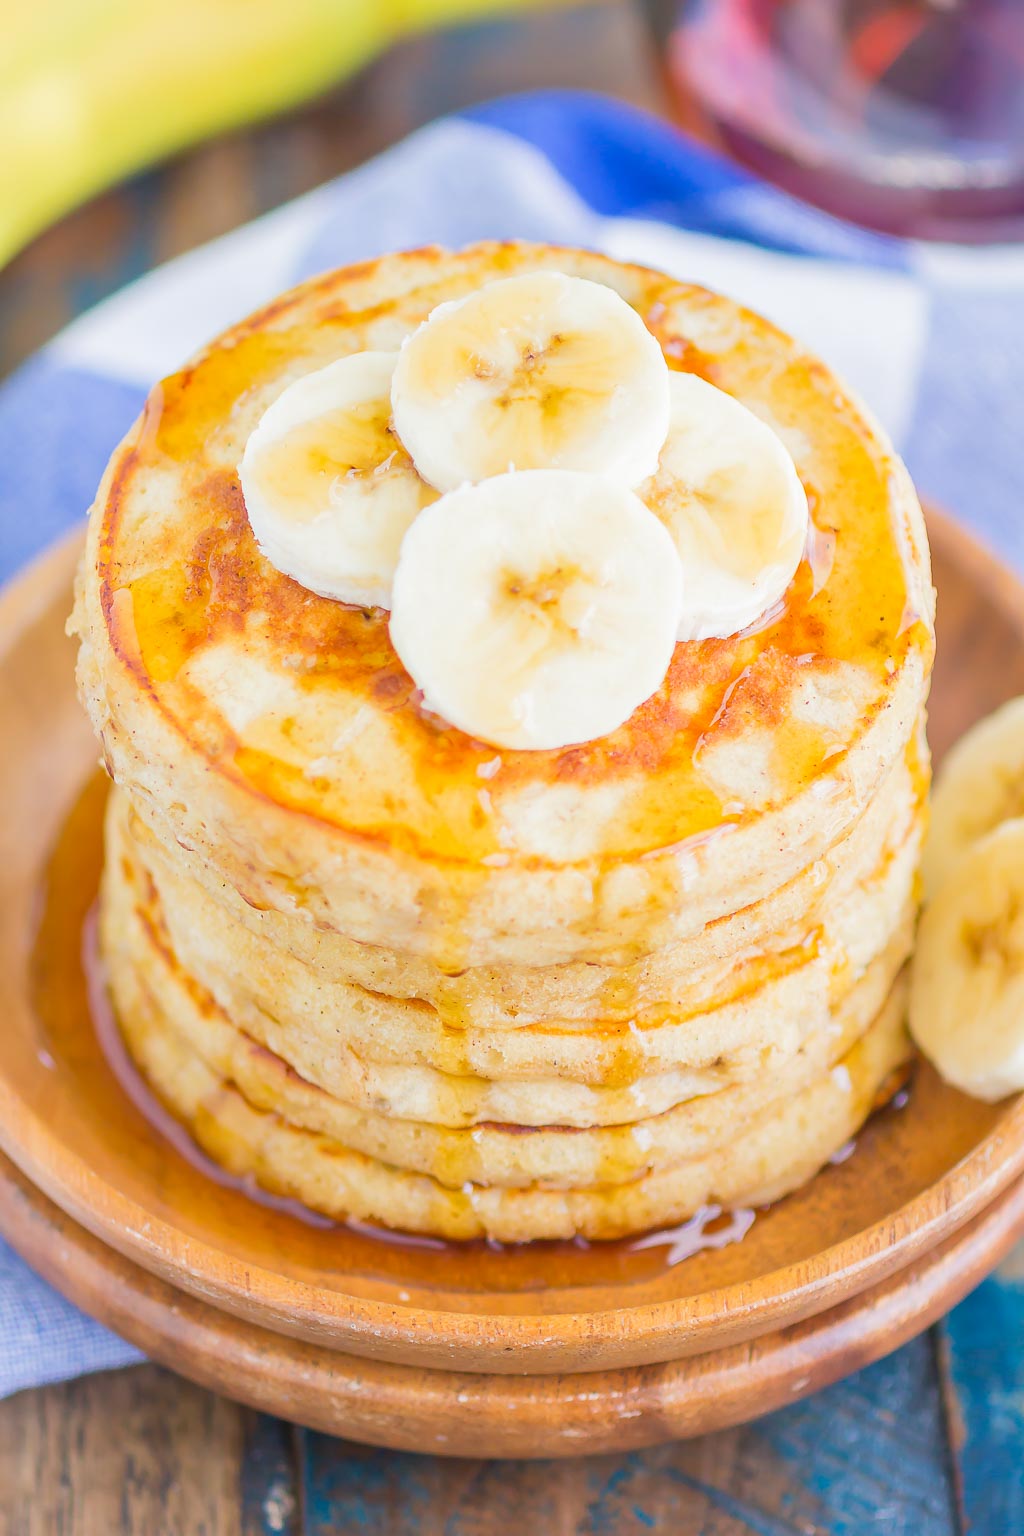 A stack of Banana Pancakes topped with banana slices and maple syrup on a wooden plate.